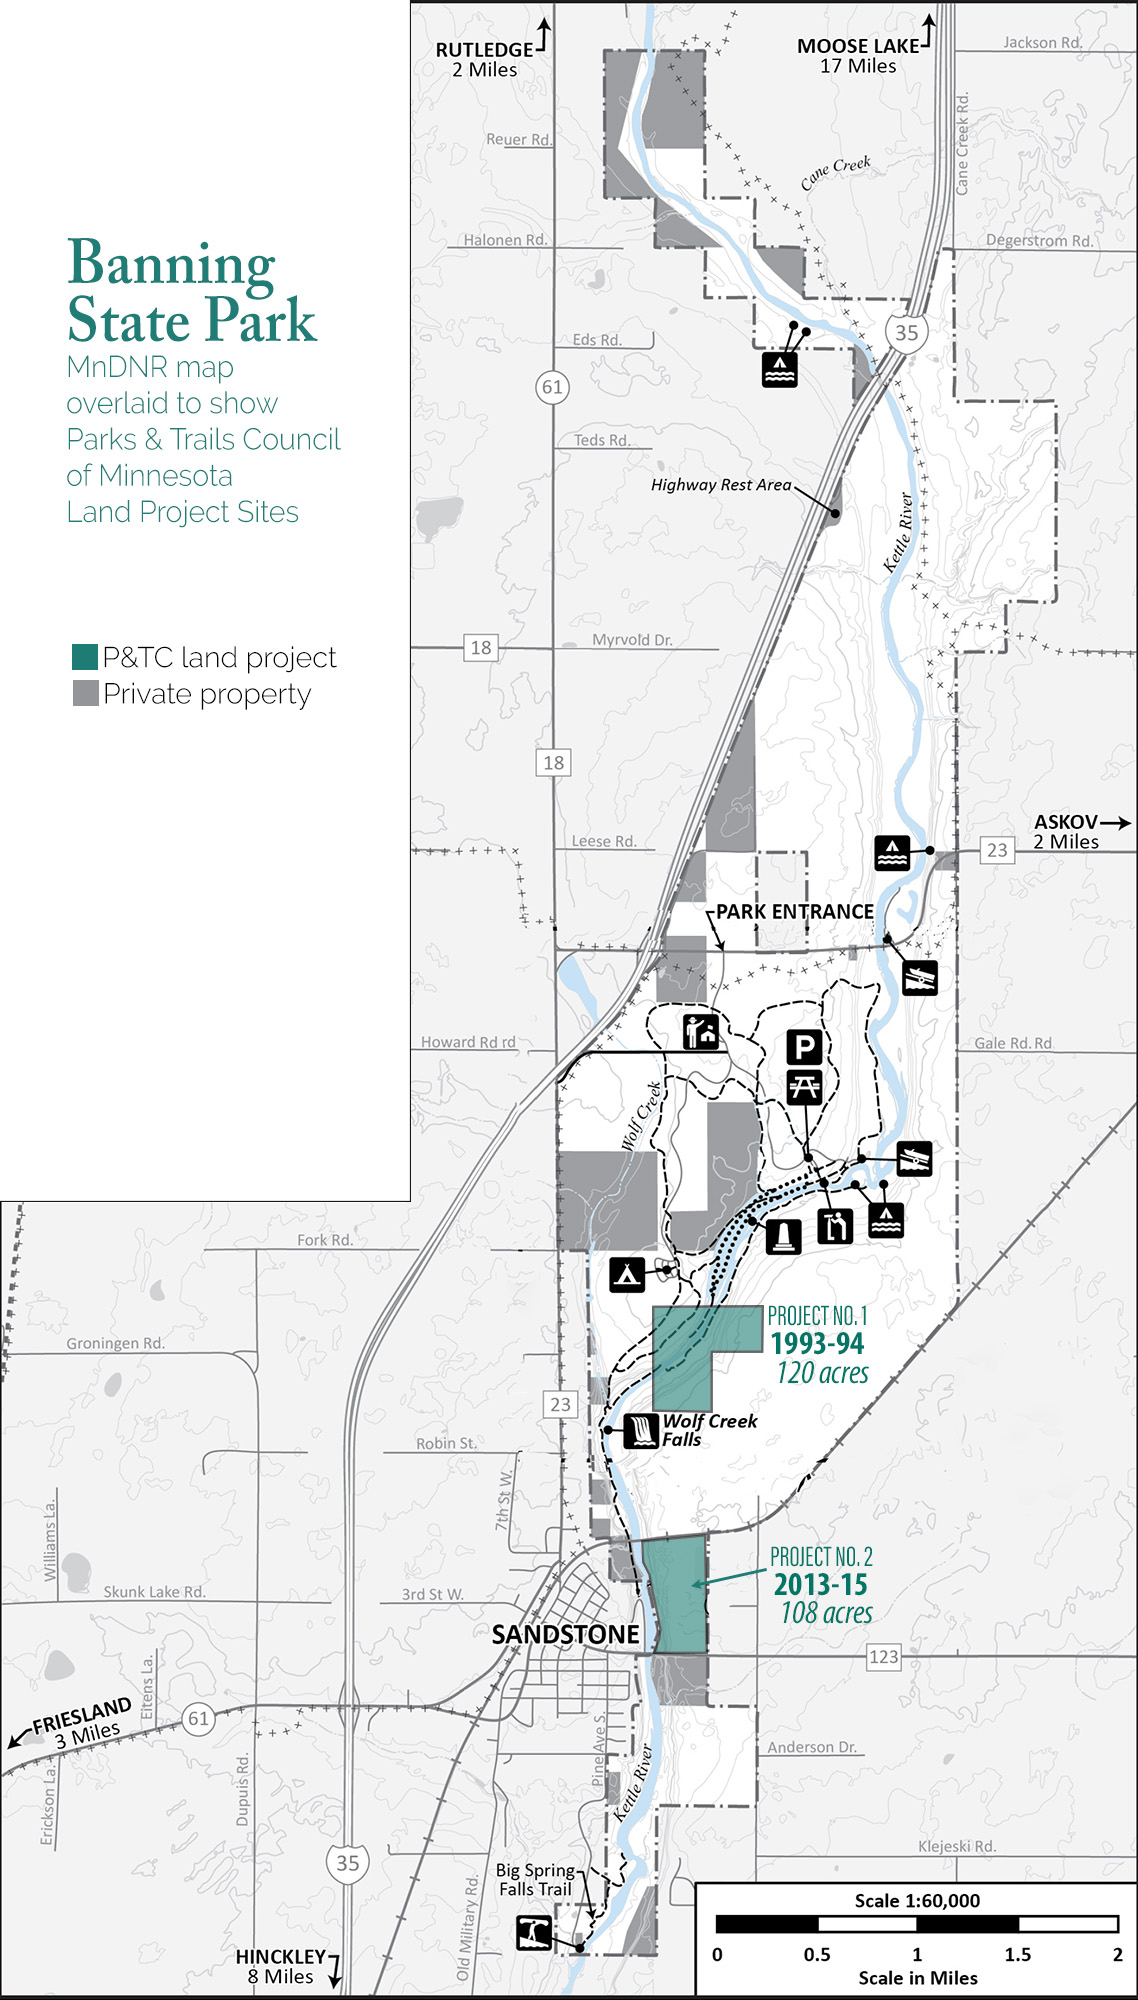 Map of Banning State Park with overlay showing acquisitions by Parks & Trails Council